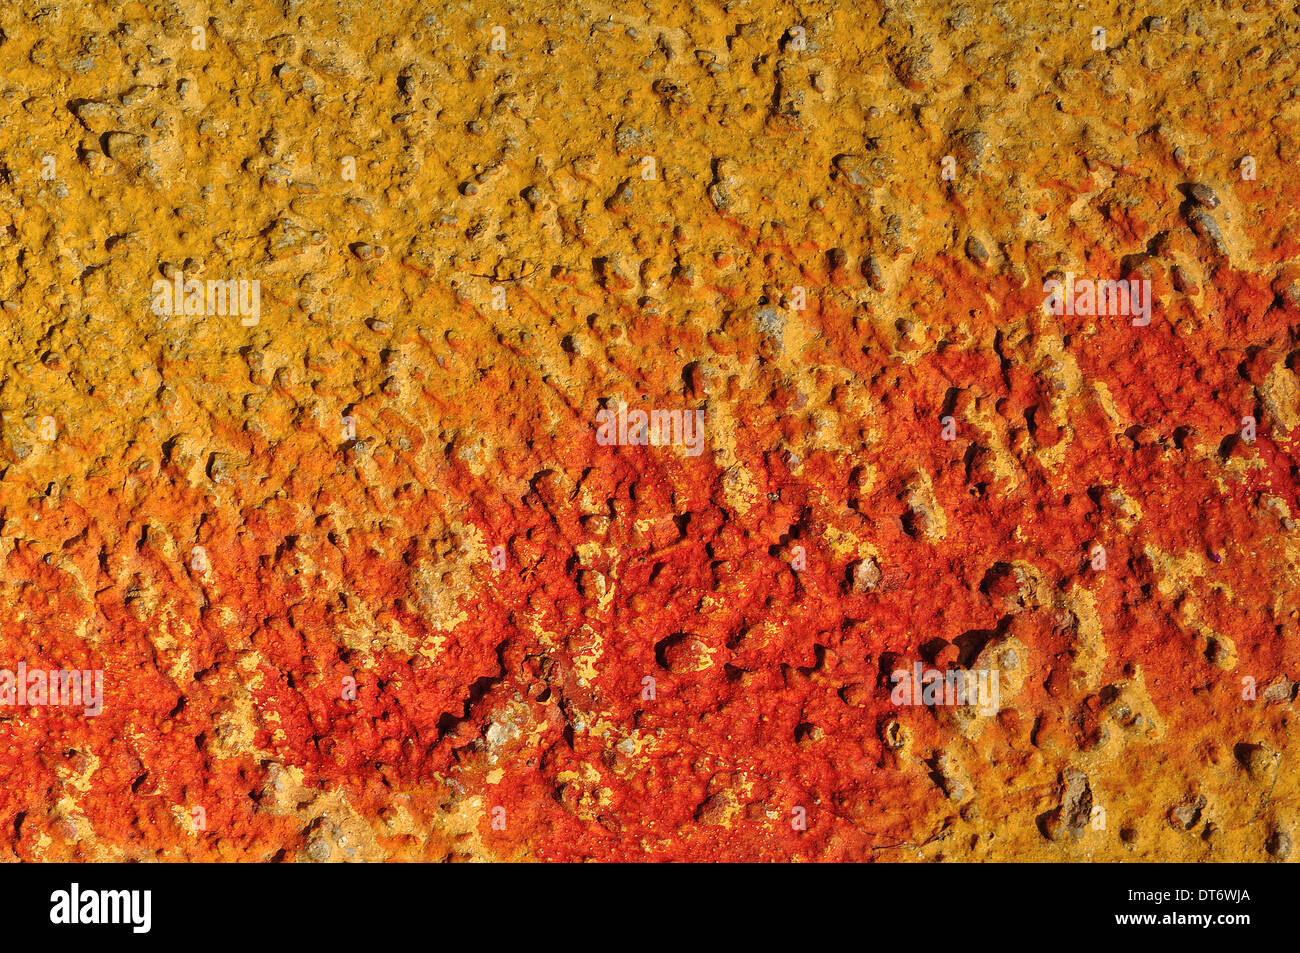 Red paint smudged on yellow textured wall background. Stock Photo